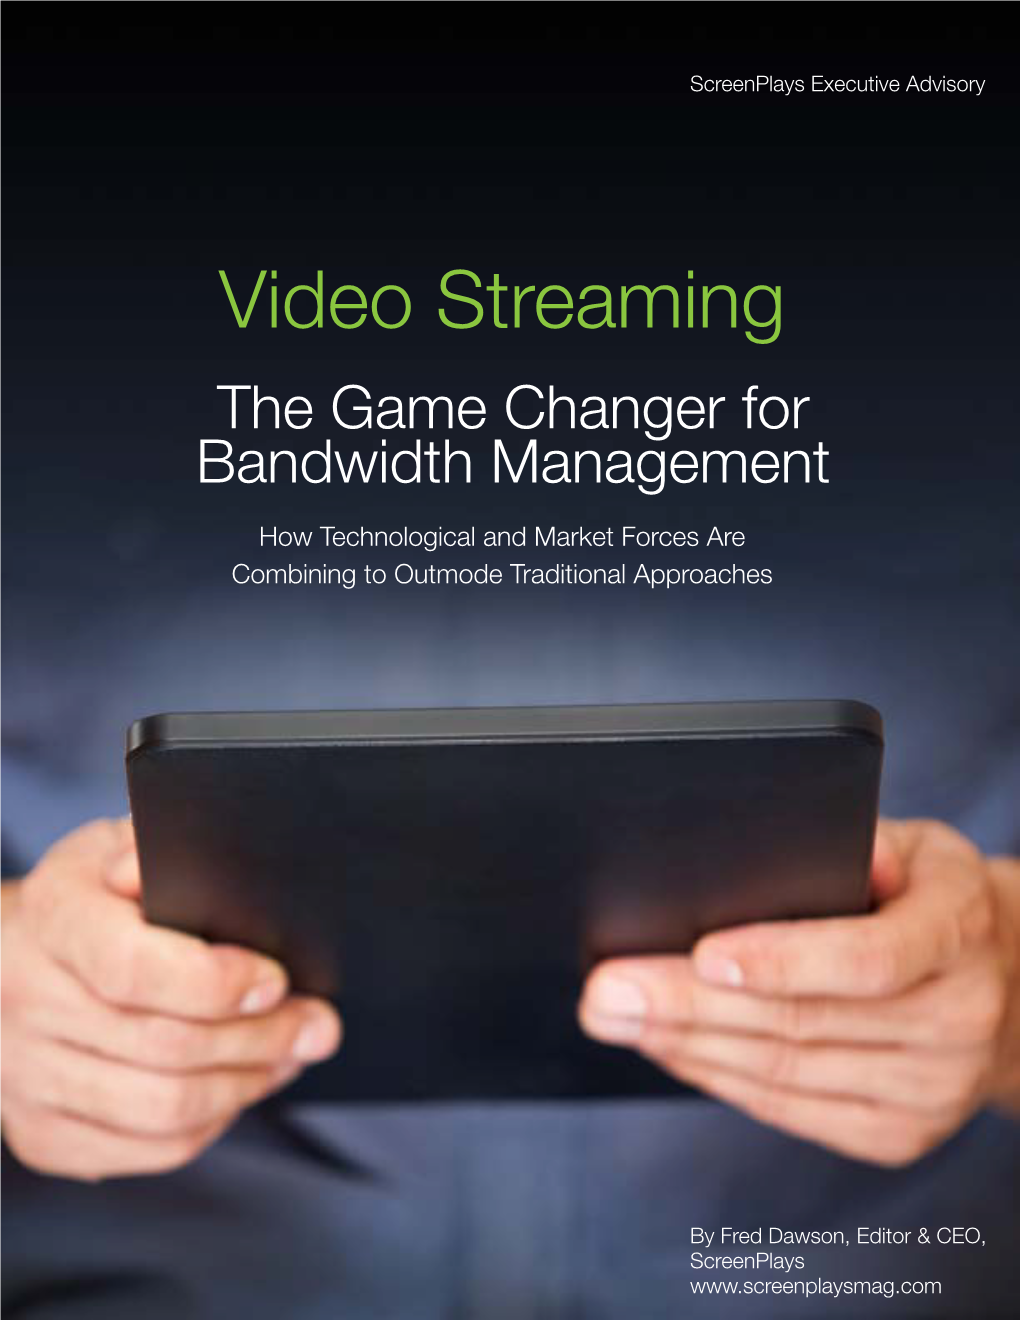 Video Streaming the Game Changer for Bandwidth Management How Technological and Market Forces Are Combining to Outmode Traditional Approaches